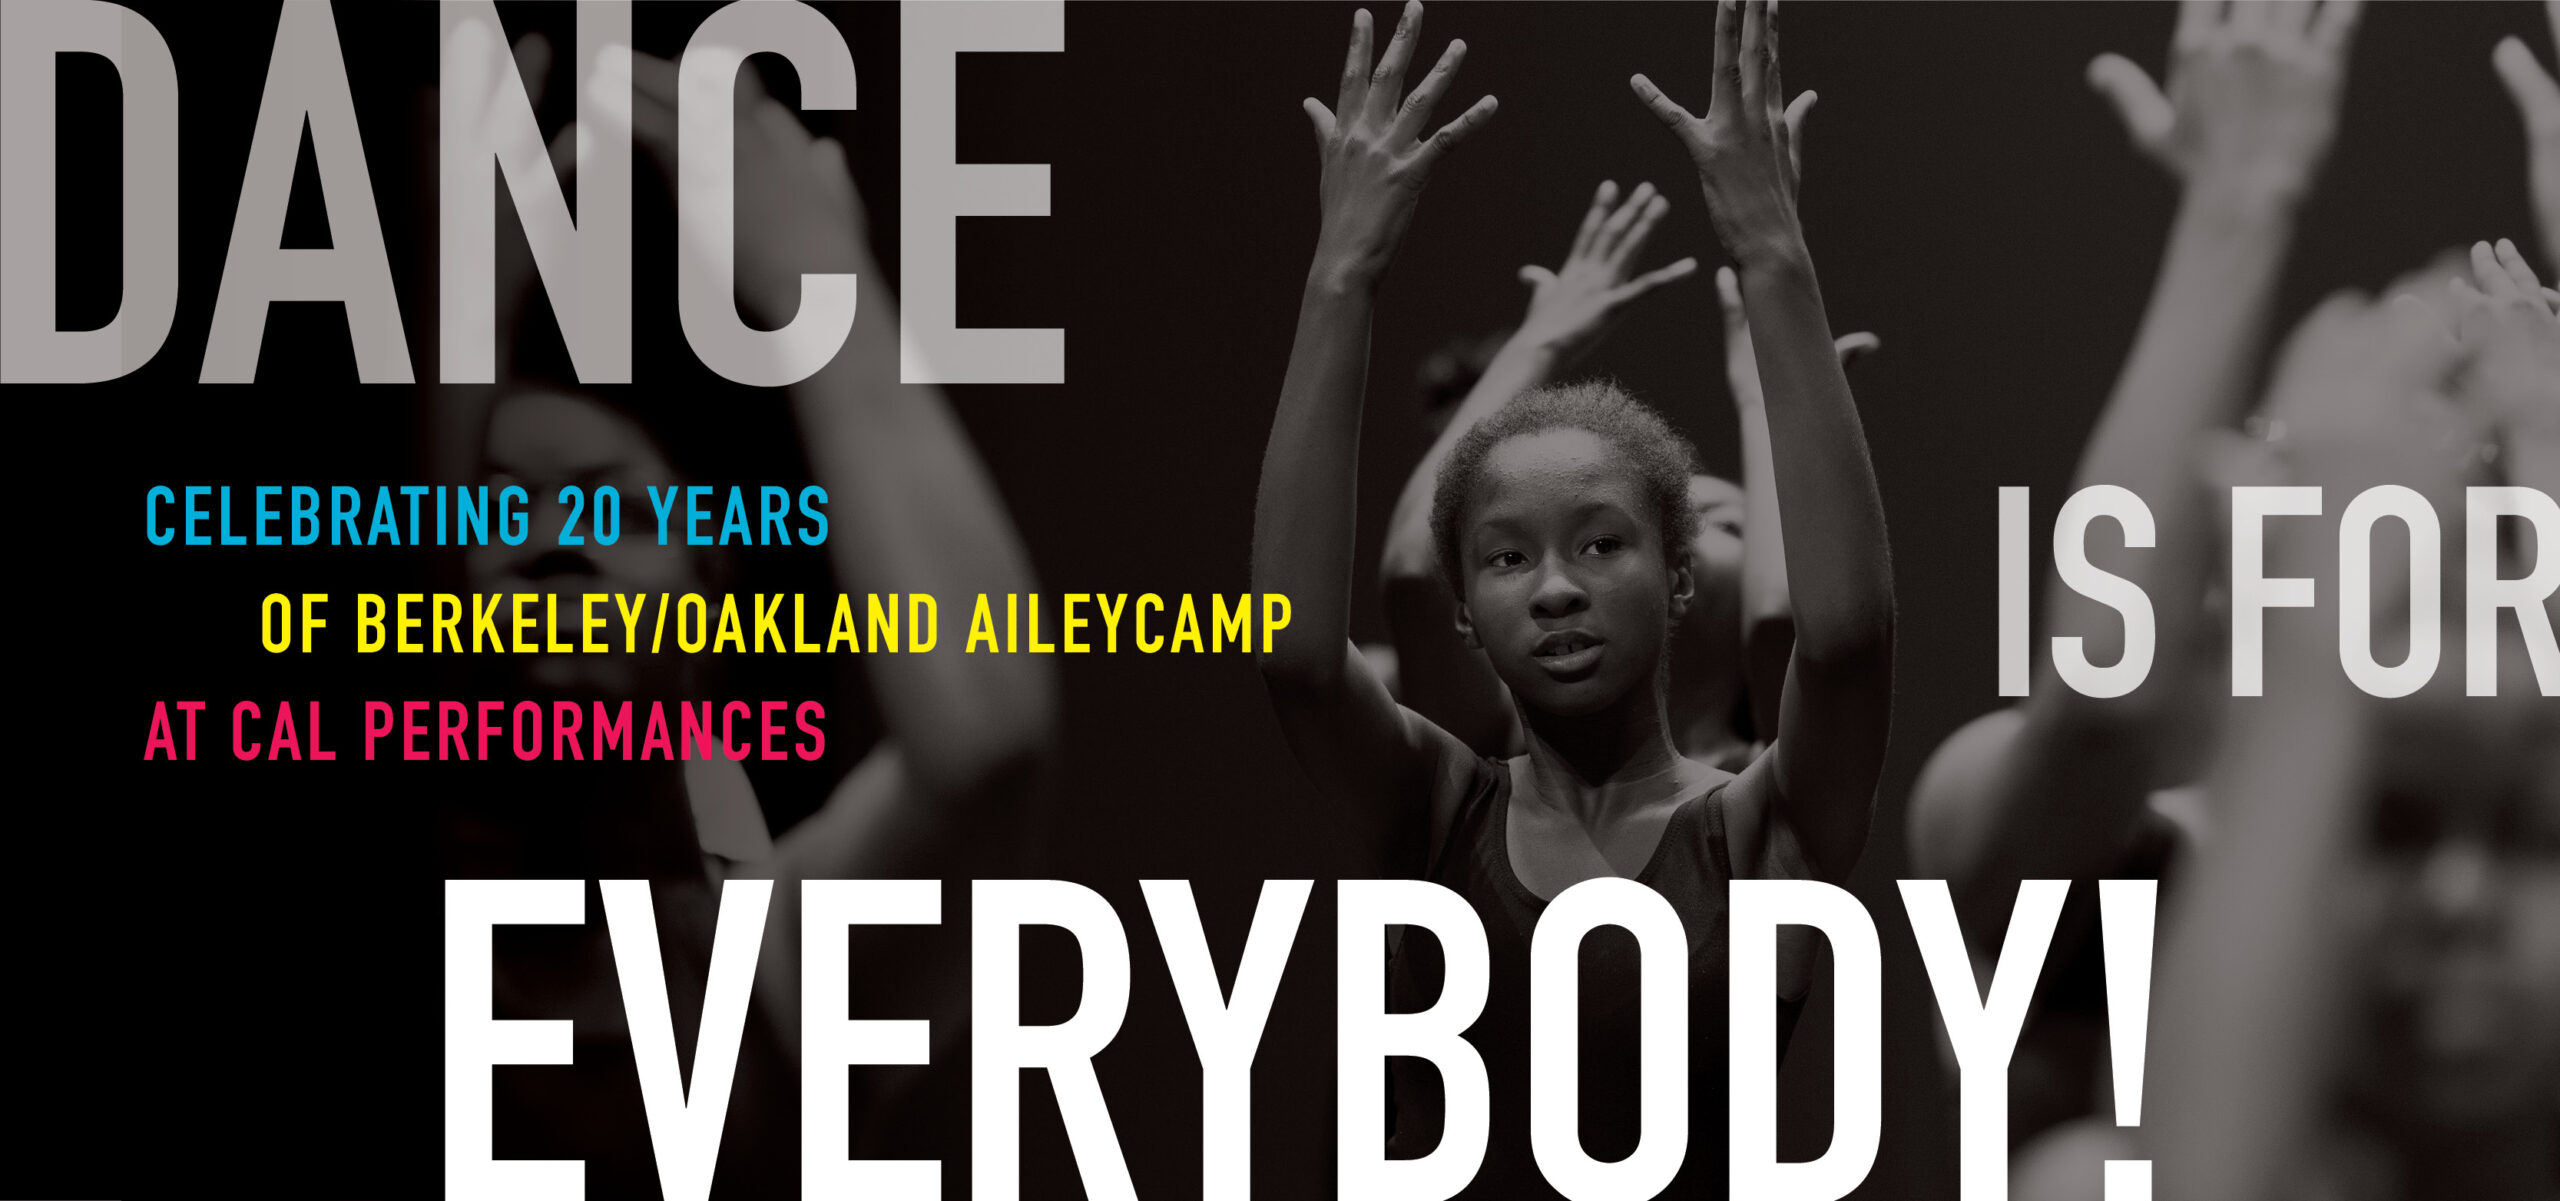 Dance is for Everybody! Celebrating 20 years of Berkeley/Oakland AileyCamp at Cal Performance's